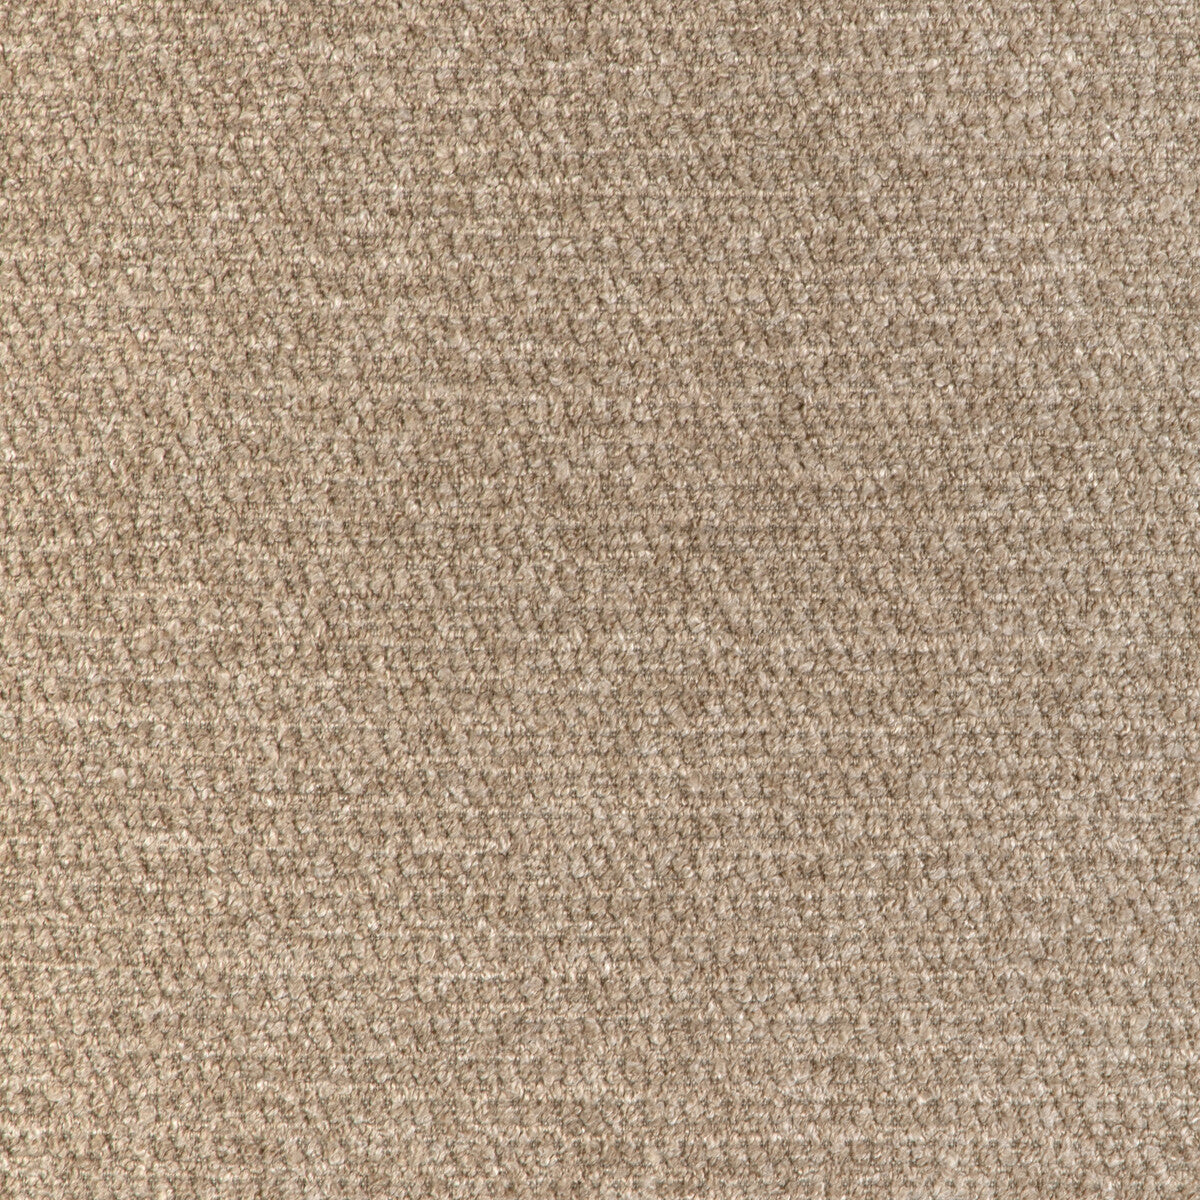 Kravet Design fabric in 36949-106 color - pattern 36946.106.0 - by Kravet Design in the Sustainable Textures II collection